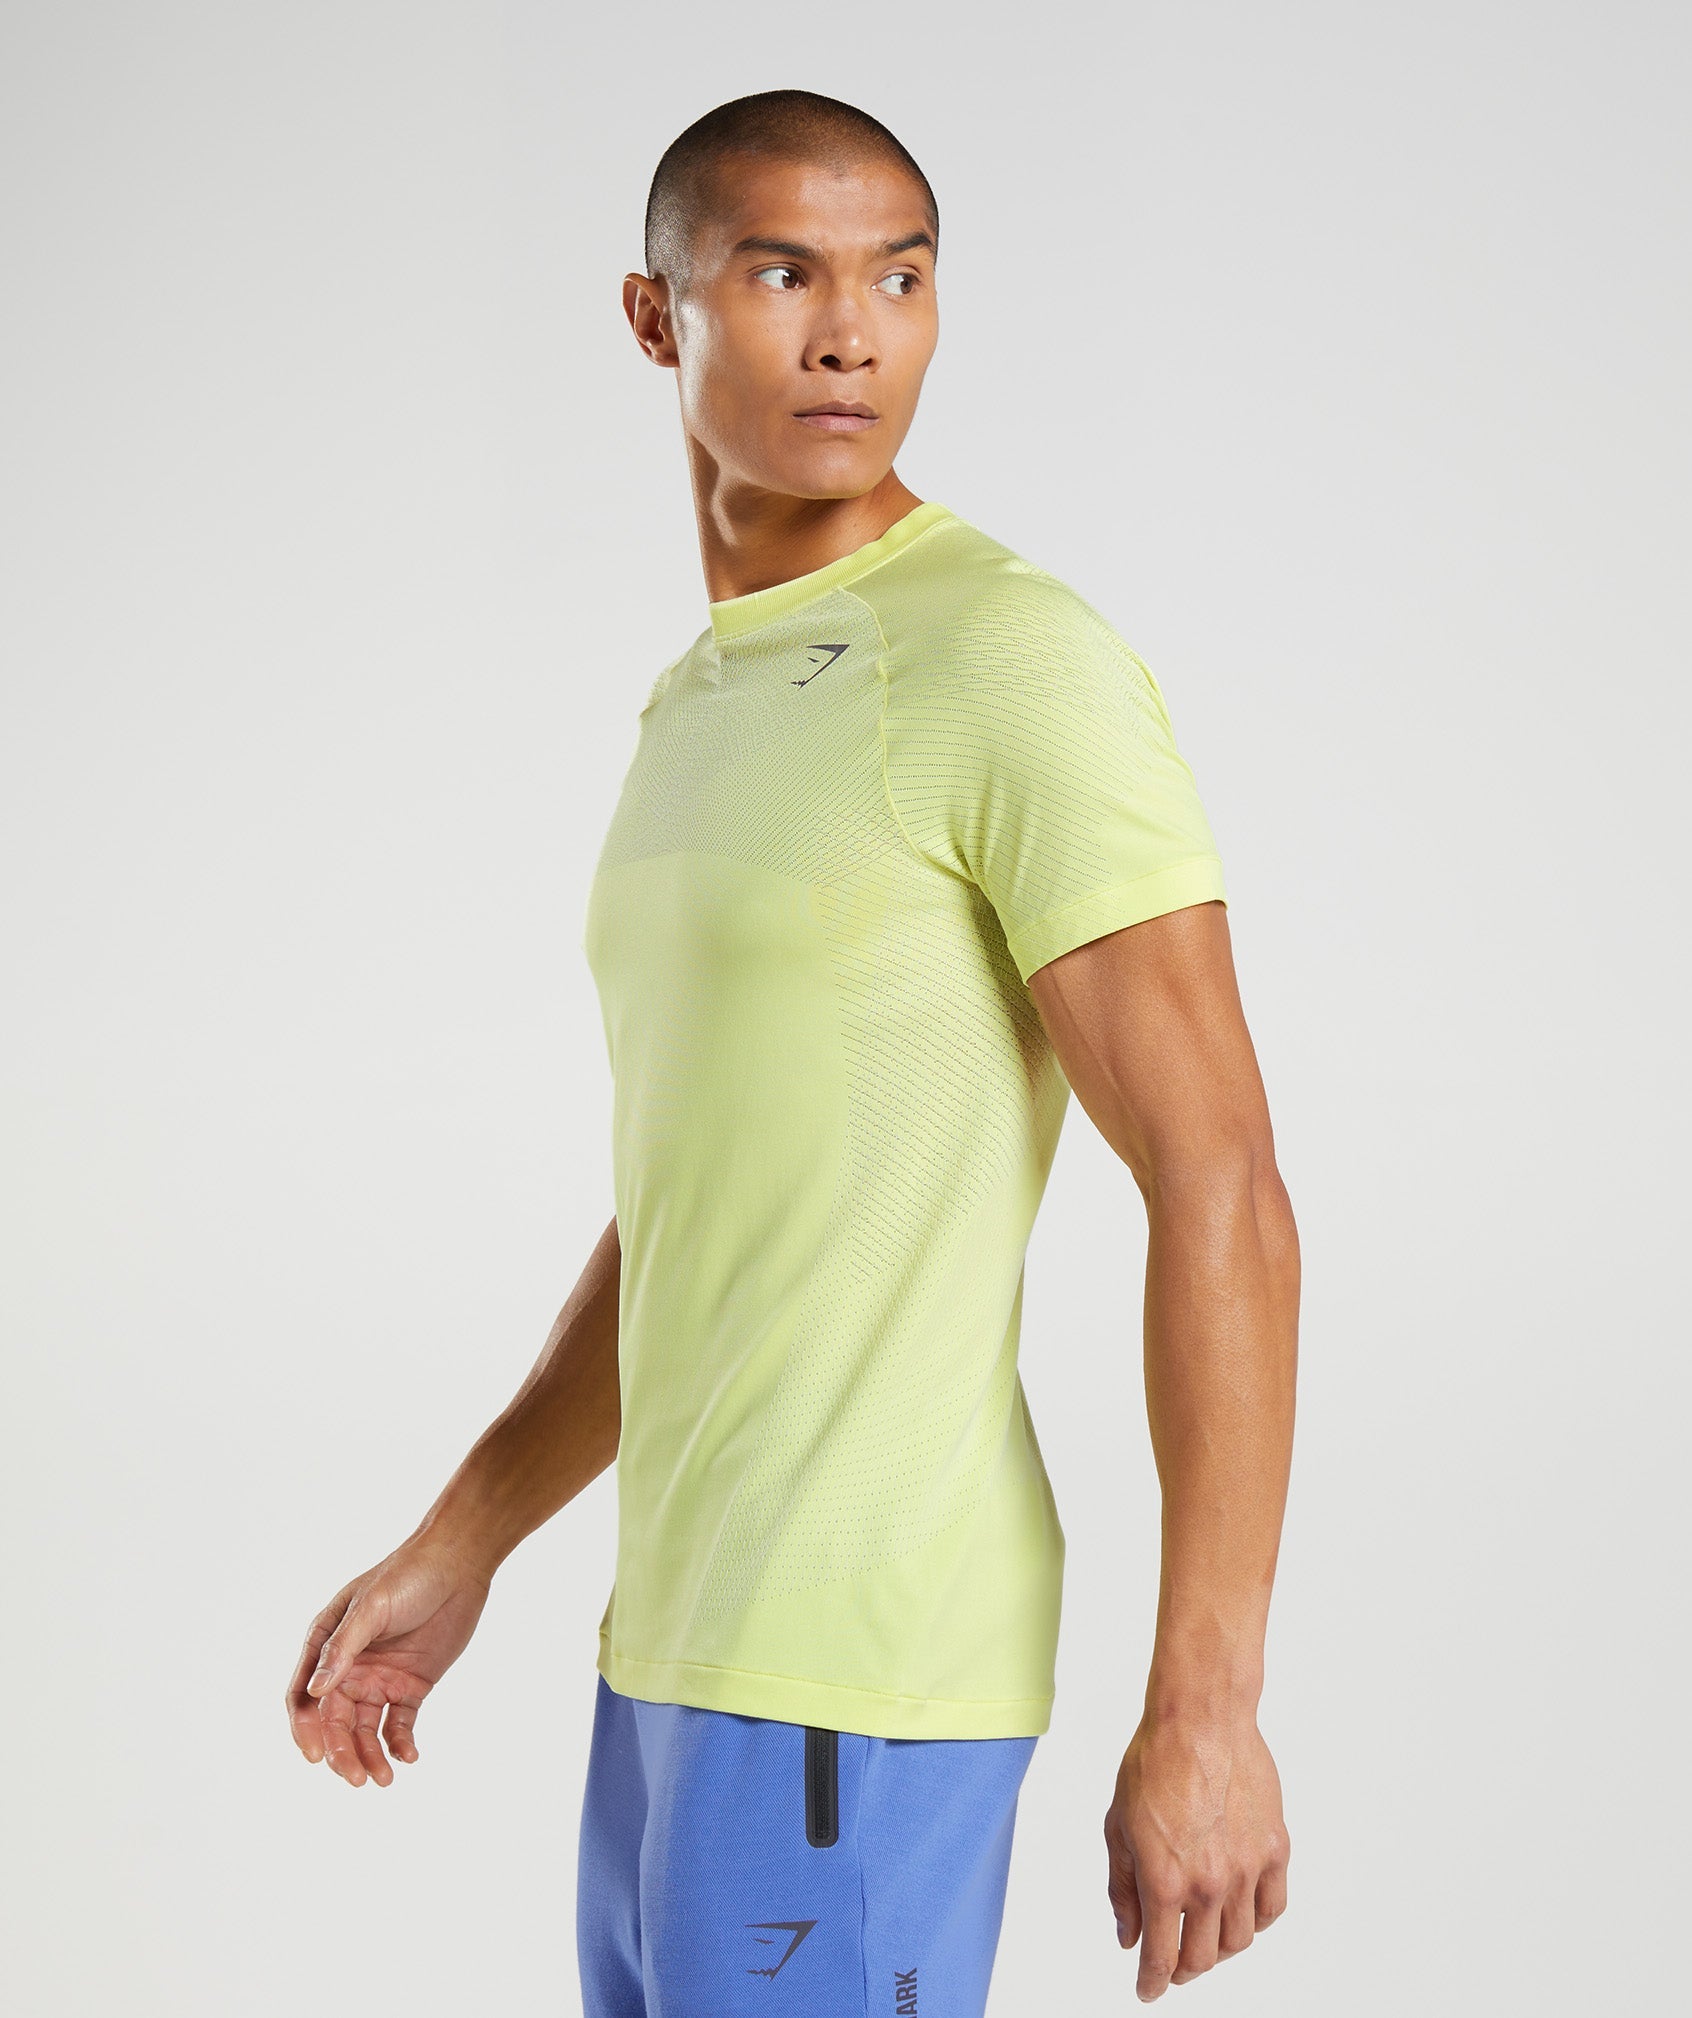 Apex Seamless T-Shirt in Firefly Green/White